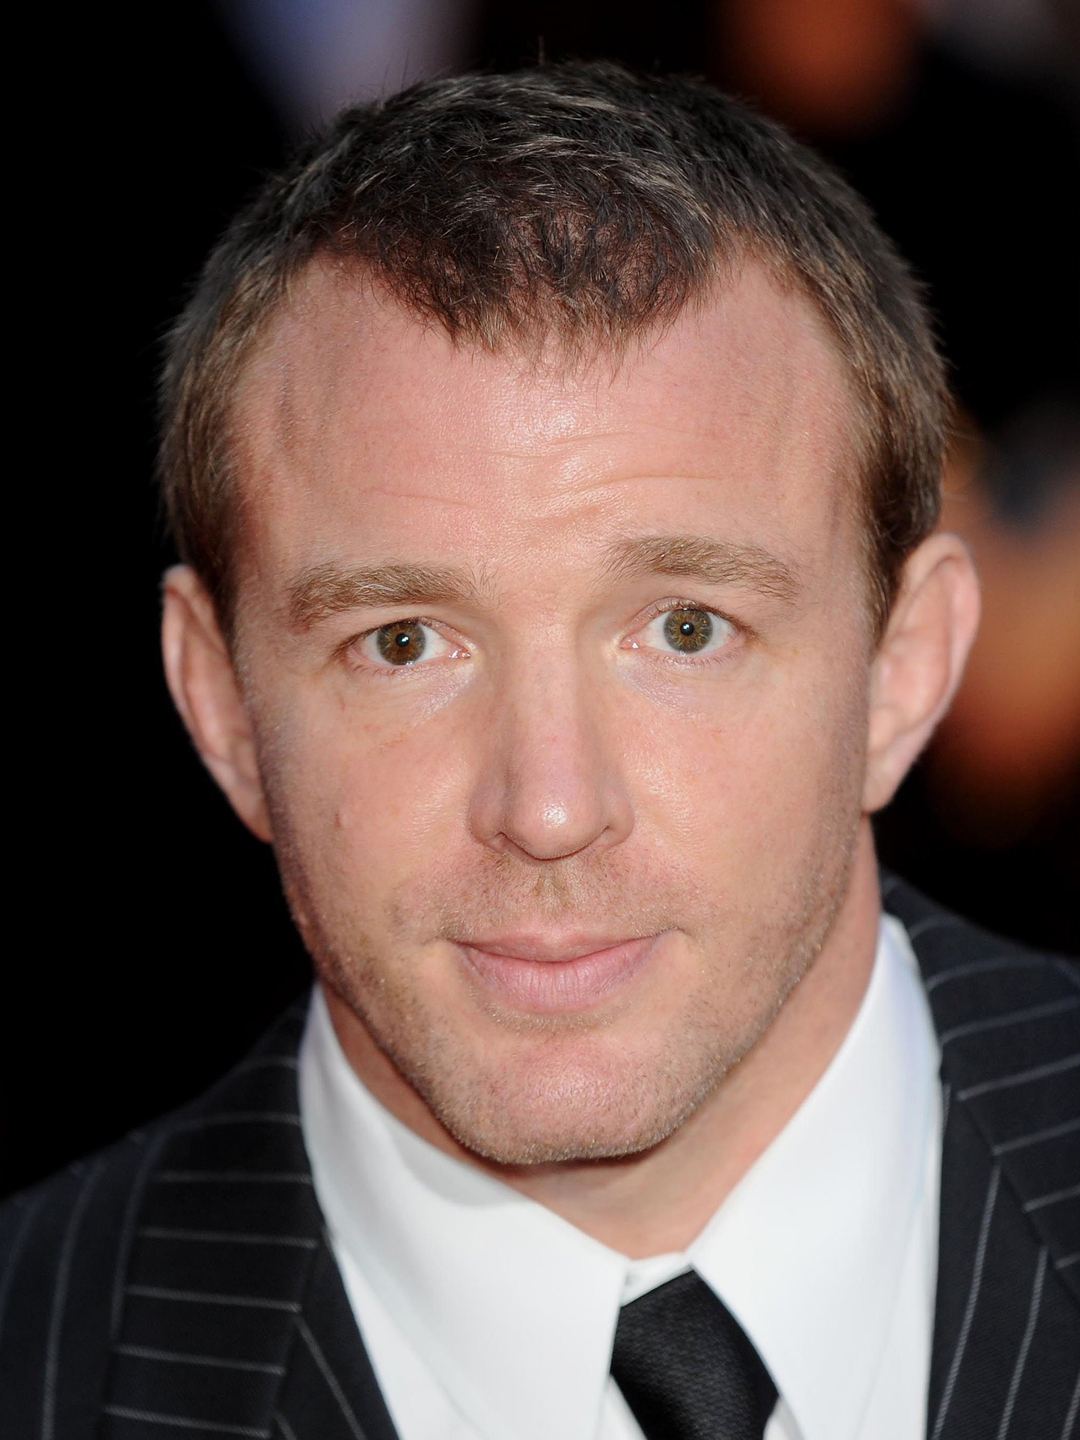 Guy Ritchie current look